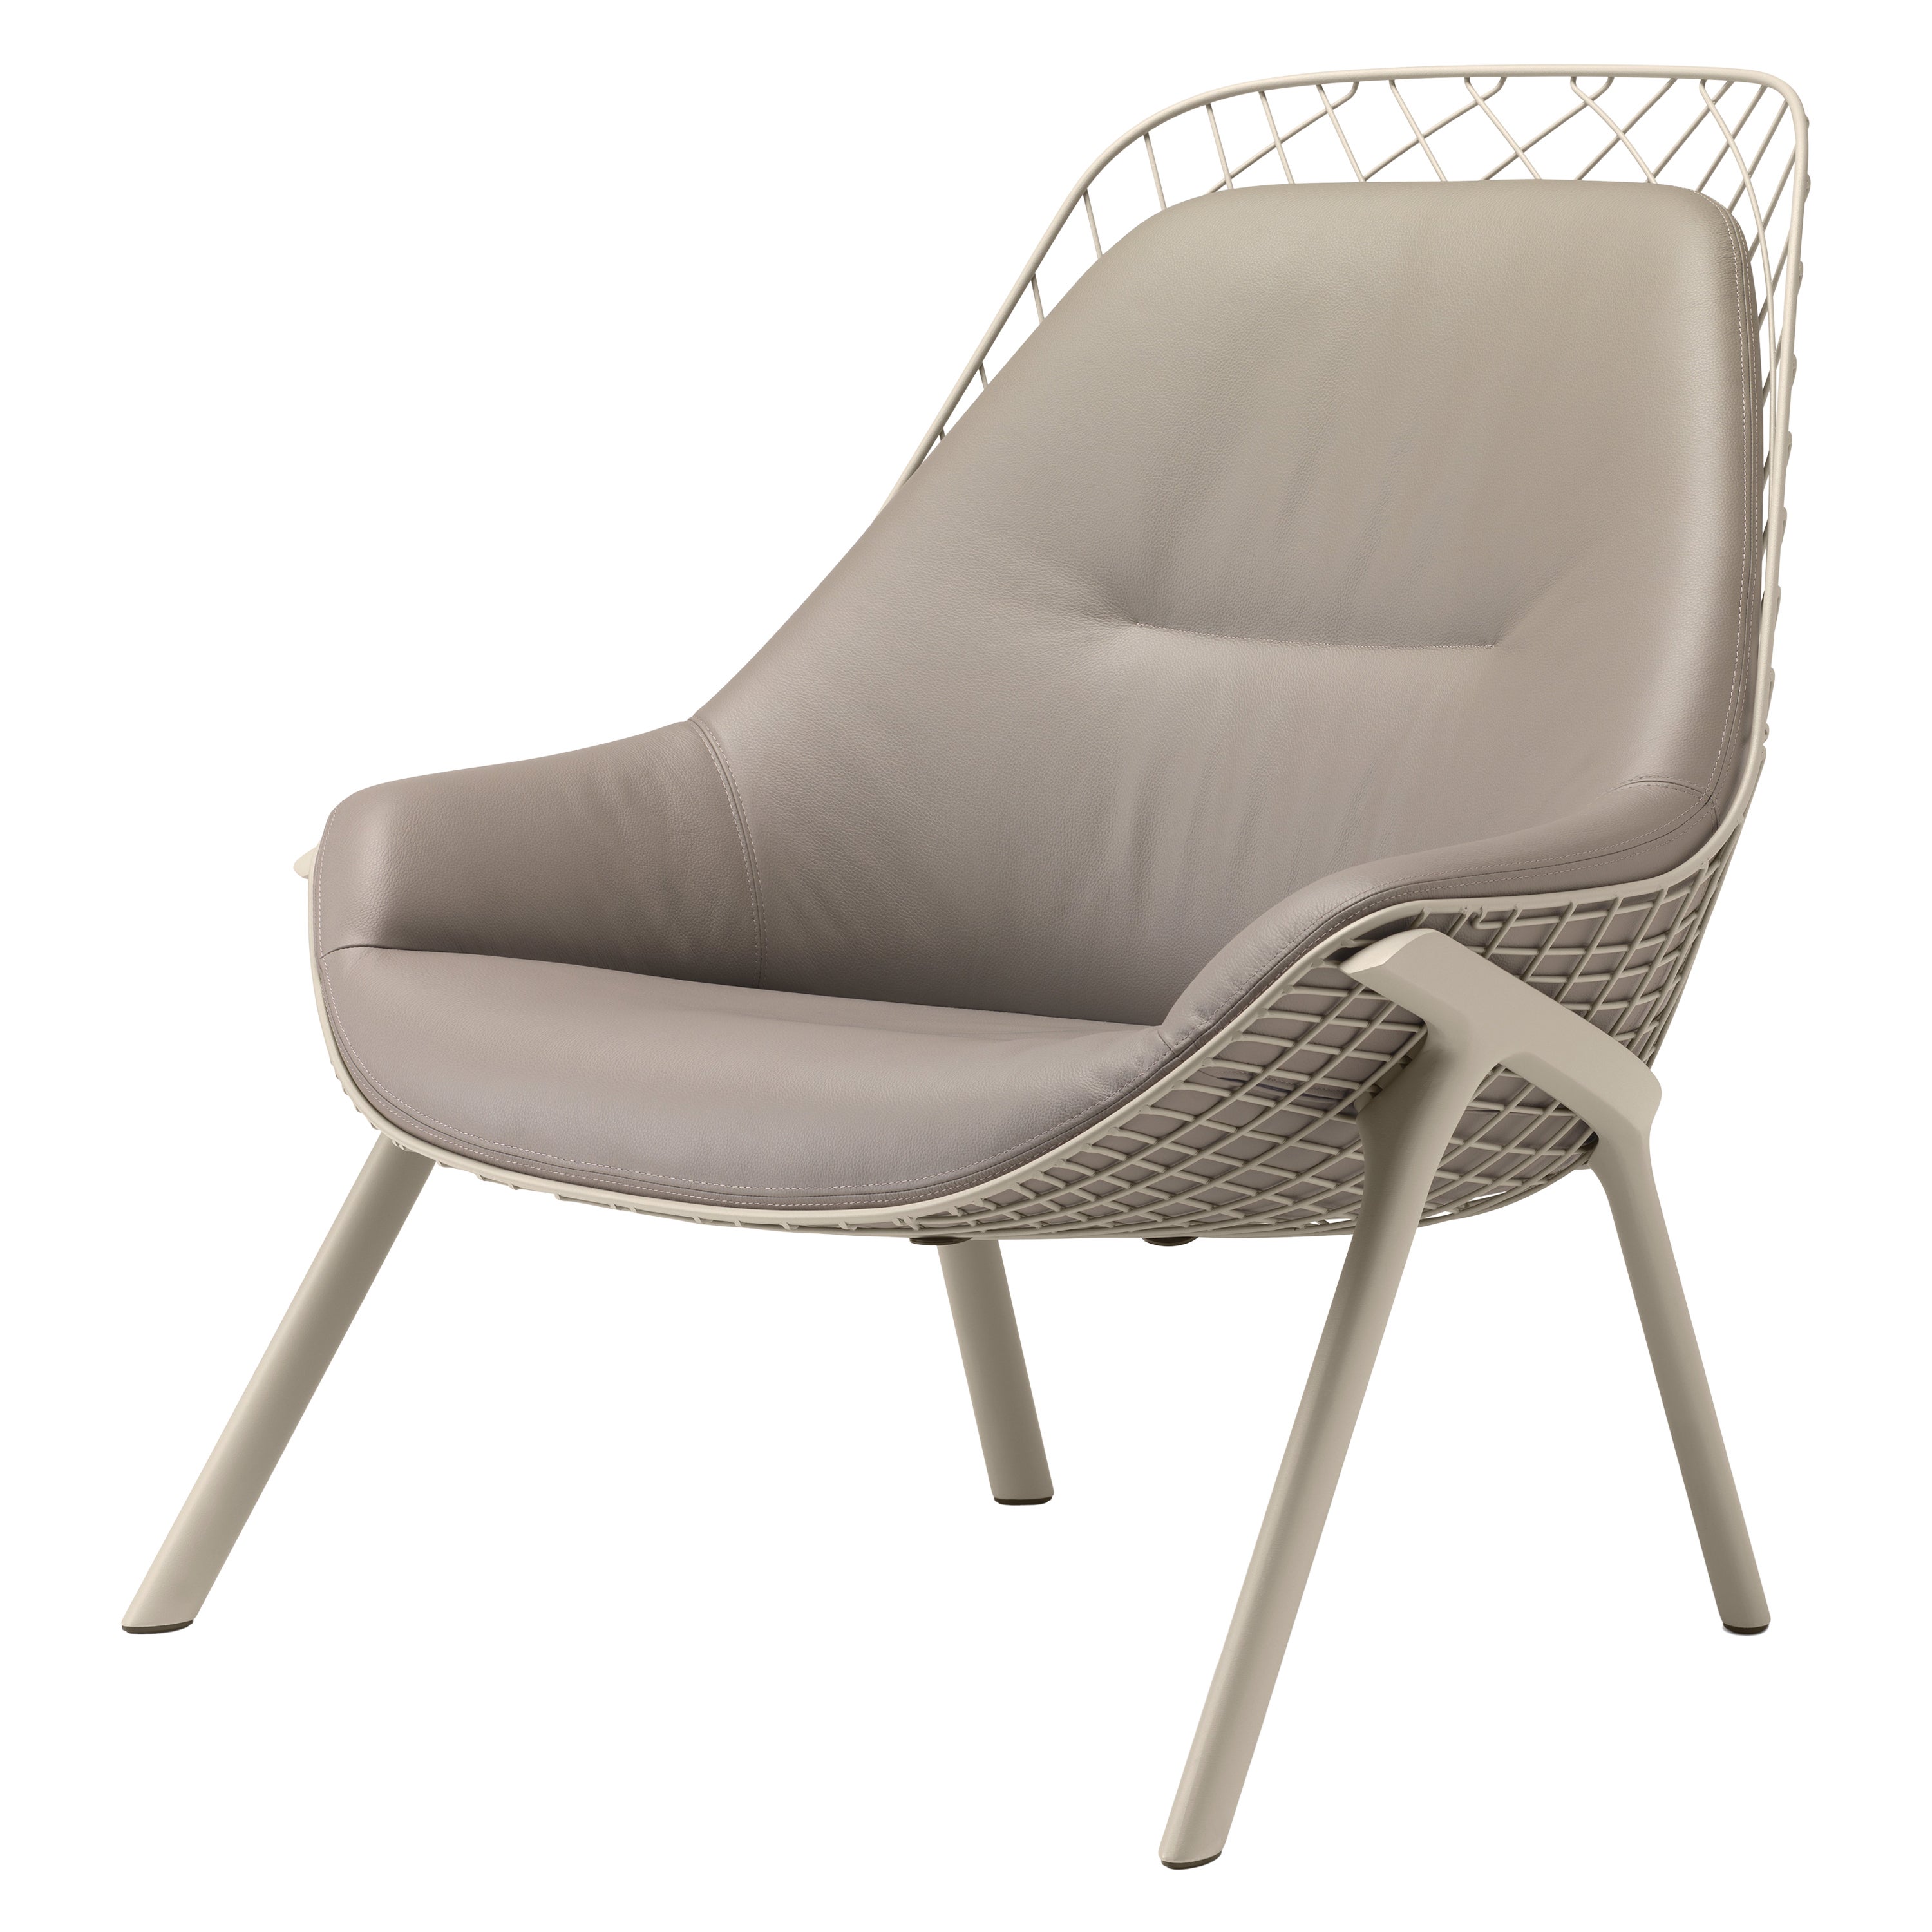 Alias 035 Gran Kobi Outdoor Armchair with Pad and Sand Lacquered Aluminum Frame For Sale